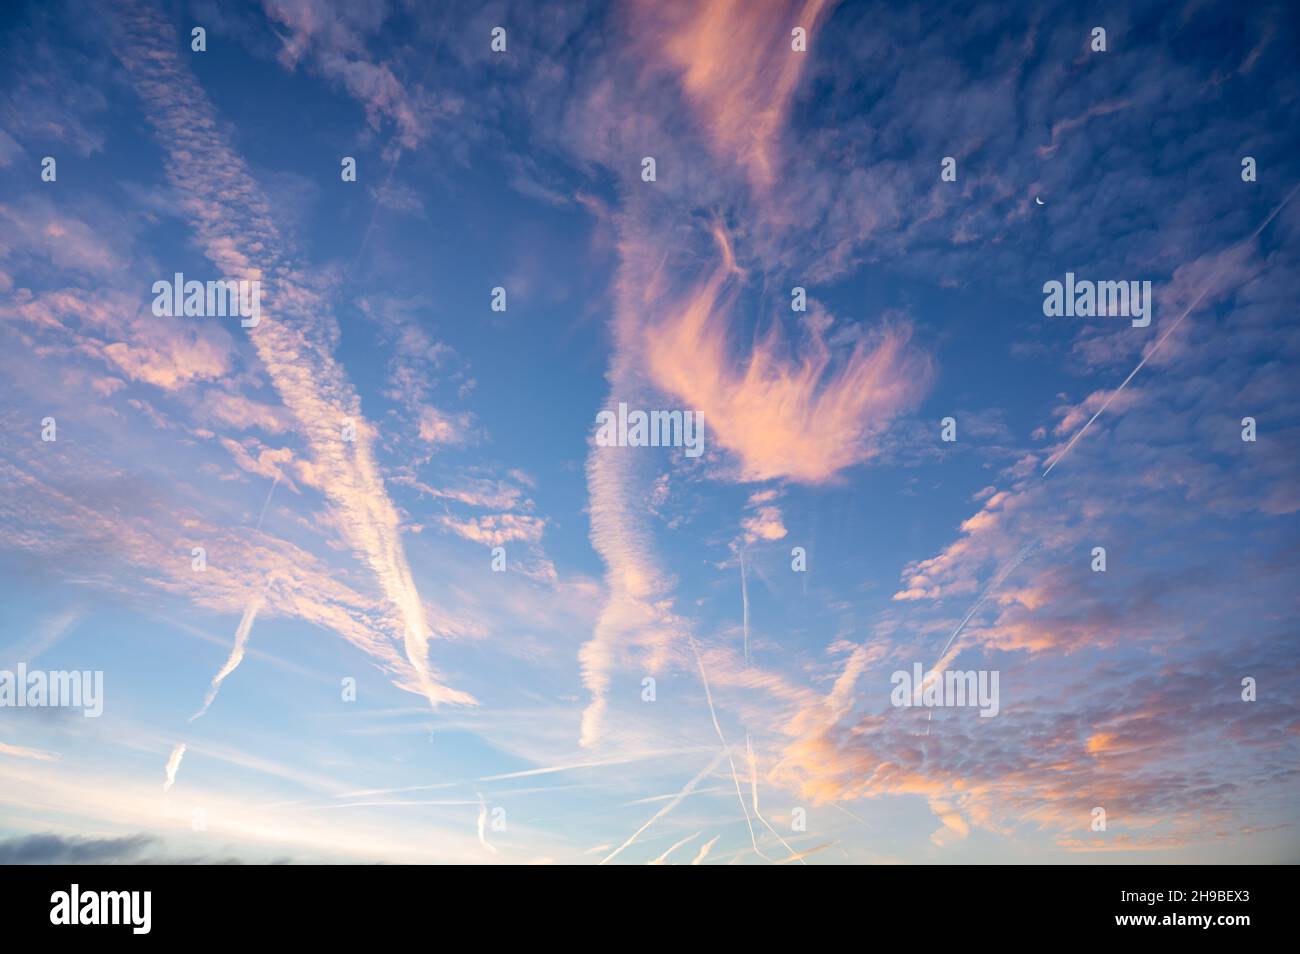 Wispy cloud formations and condensation trails from aircraft with the morning sun lighting up the clouds and contrails with an orange tint. Stock Photo